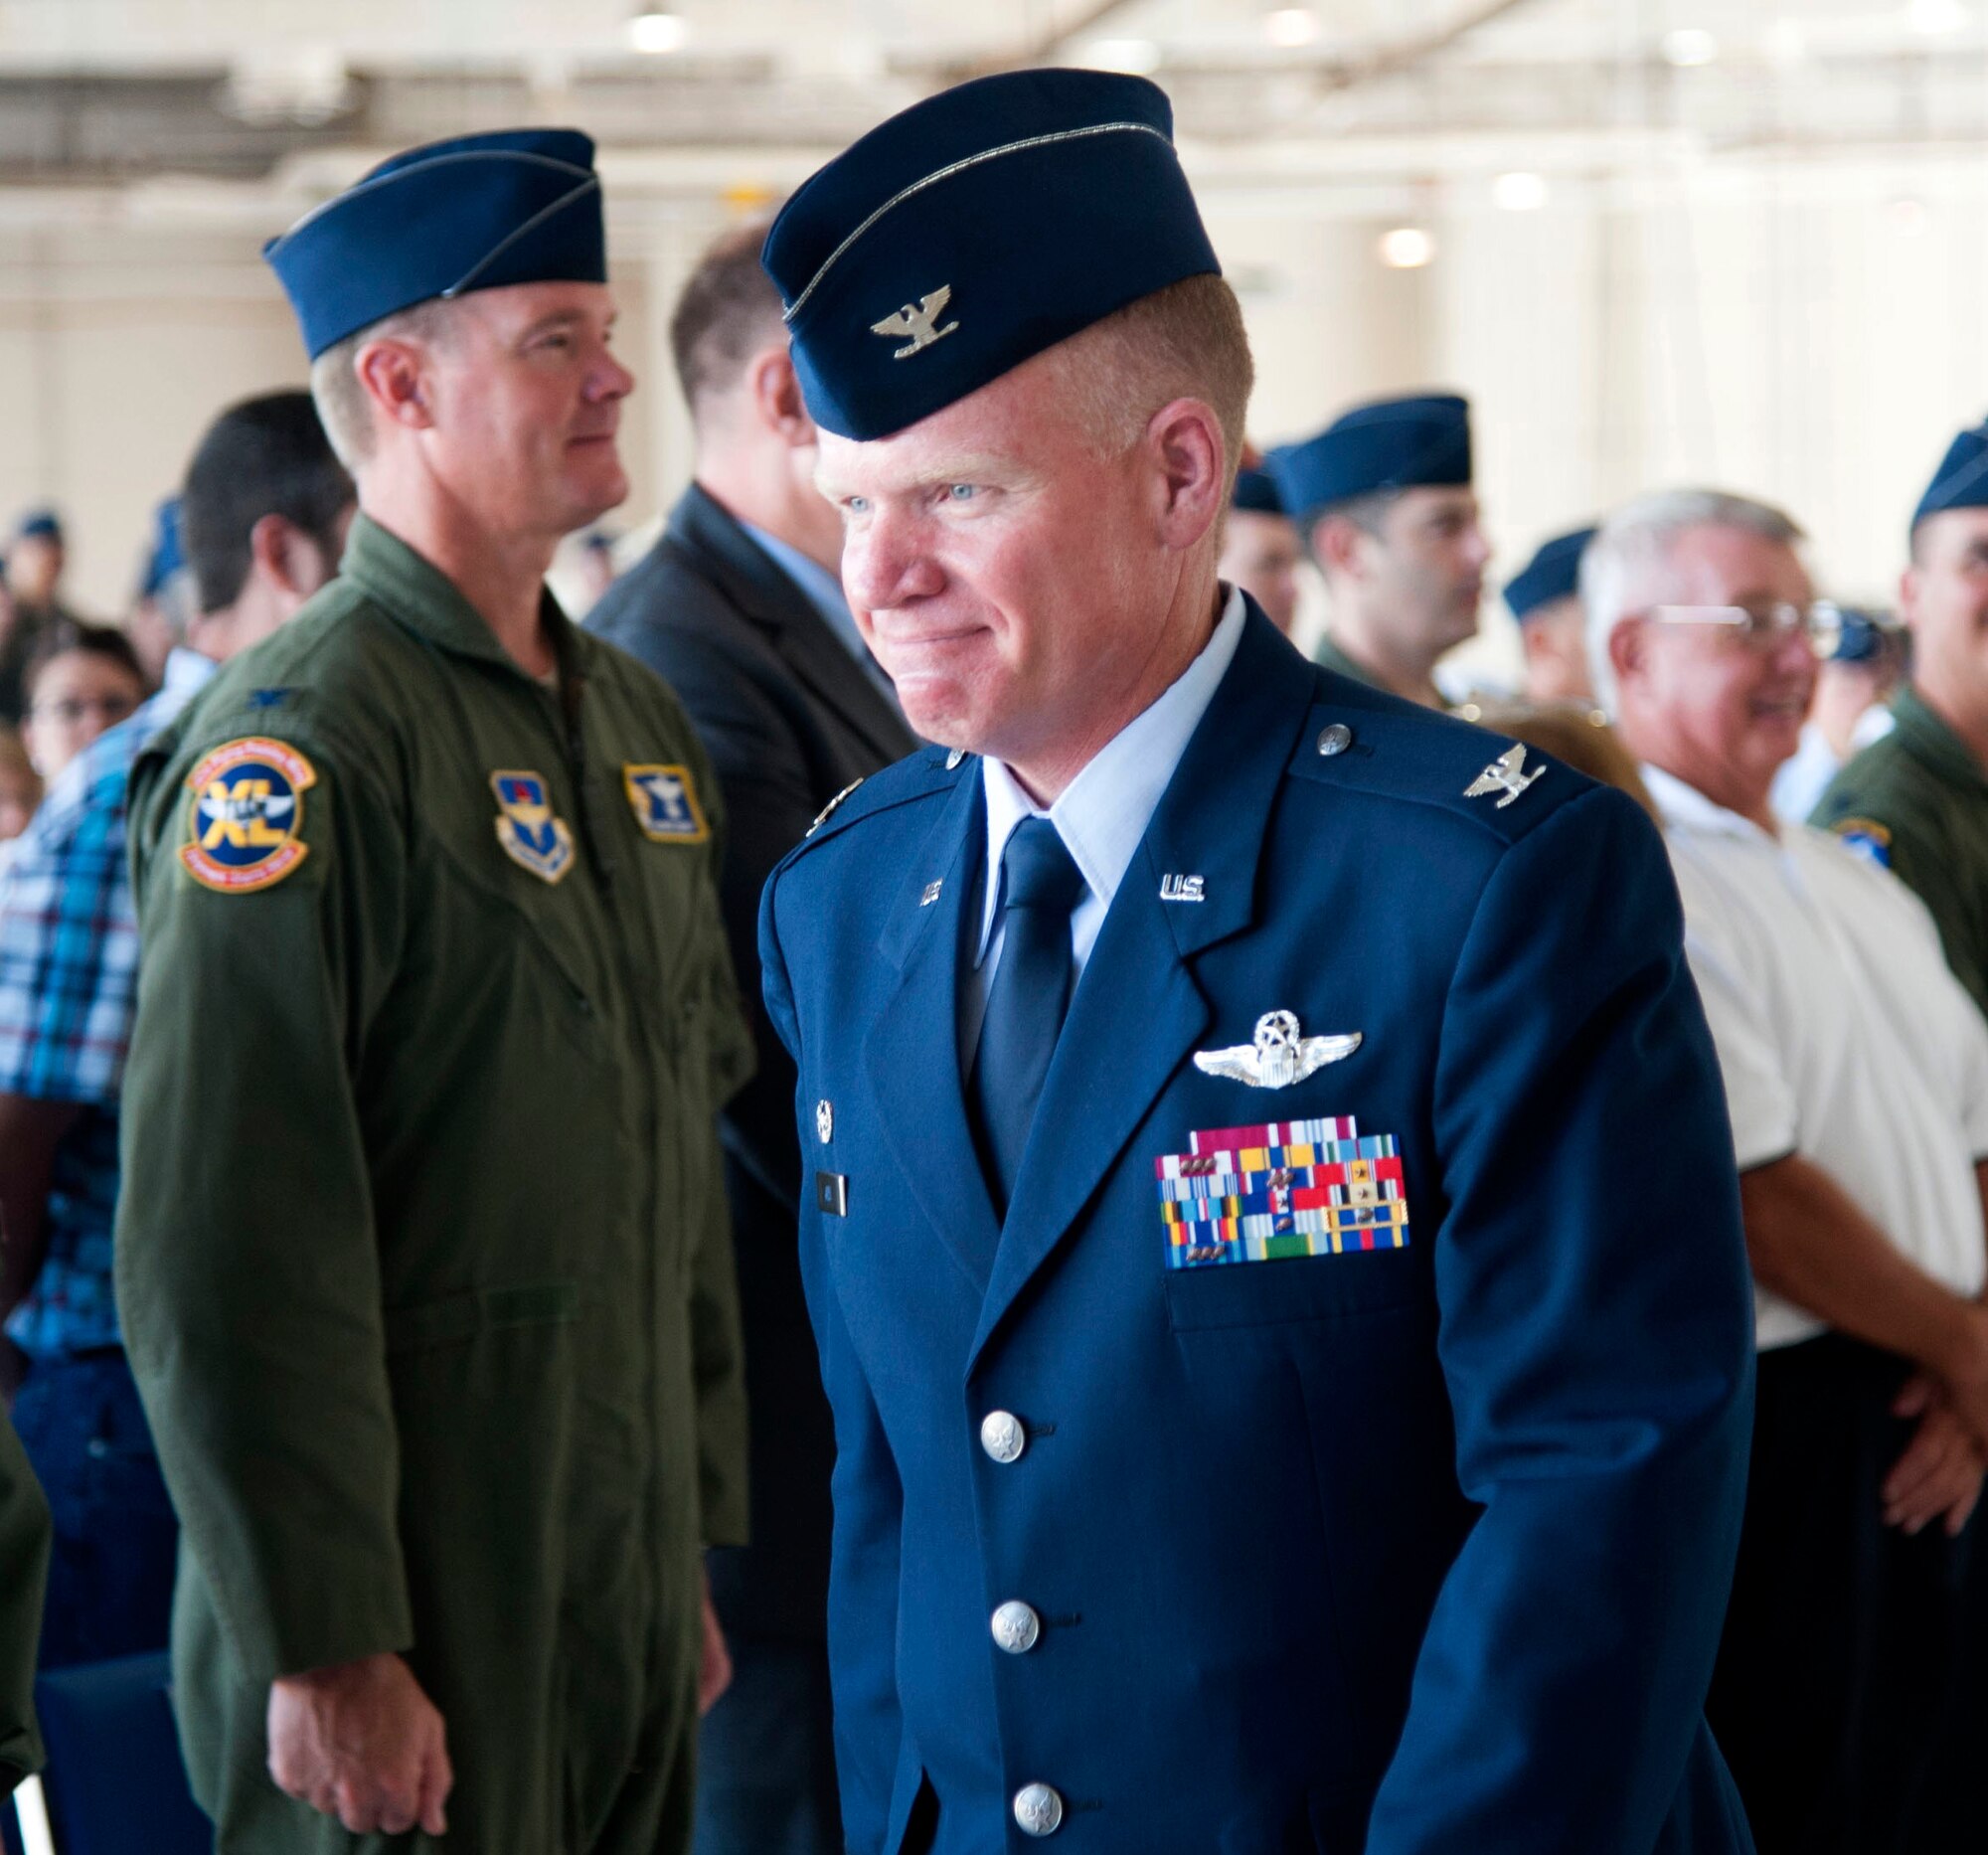 Col. Darrell Judy departs the ceremony where he assumed command of the 71st Flying Training Wing, June 28, at Vance Air Force Base, Oklahoma. Judy began his flying career at Vance as a student pilot in 1994. (U.S. Air Force photo/ Staff Sgt. Nancy Falcon)